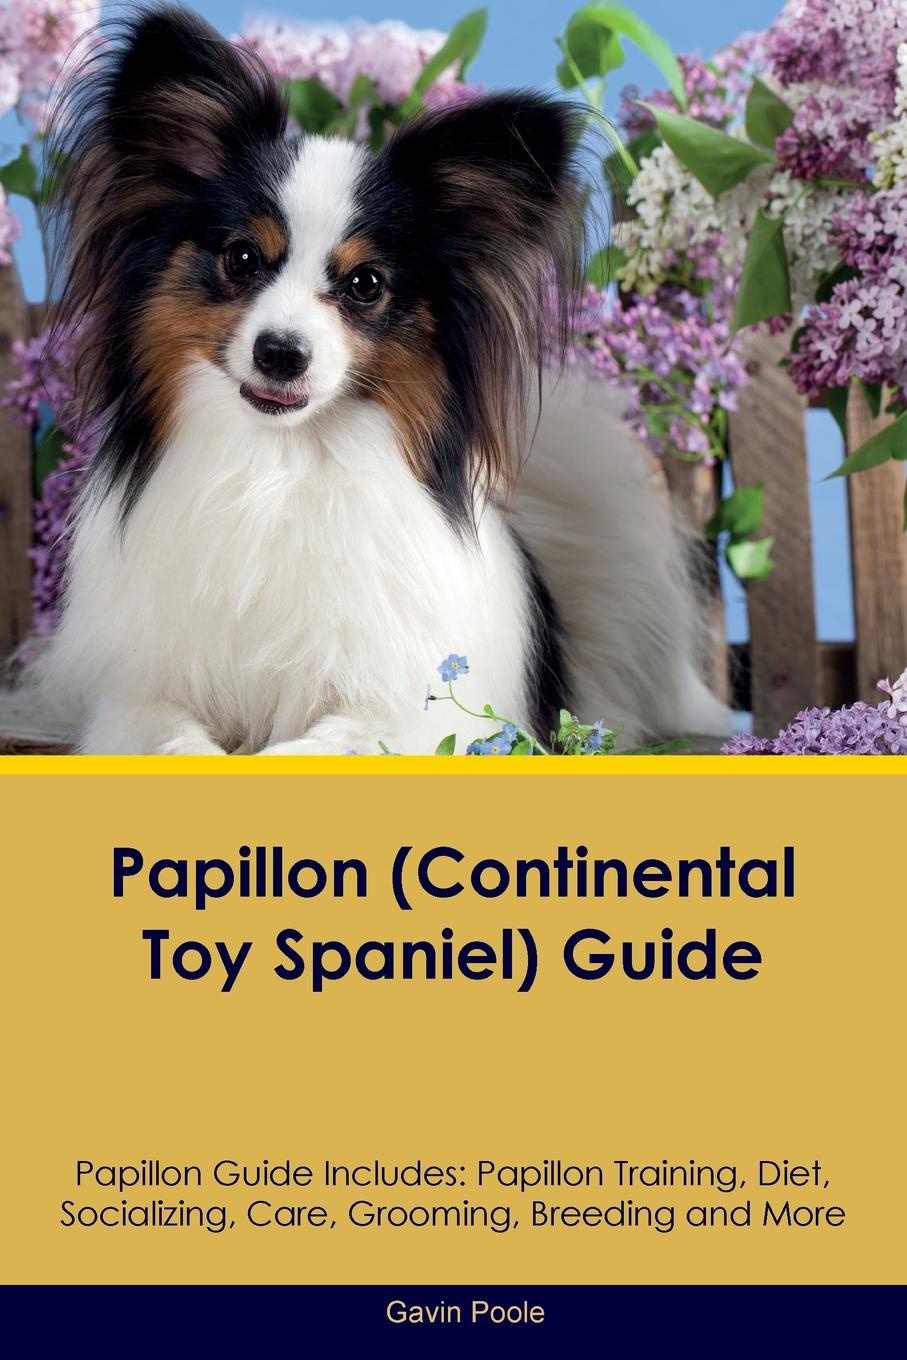 Gavin Poole Papillon (Continental Toy Spaniel) Guide Papillon Guide Includes. Papillon Training, Diet, Socializing, Care, Grooming, Breeding and More